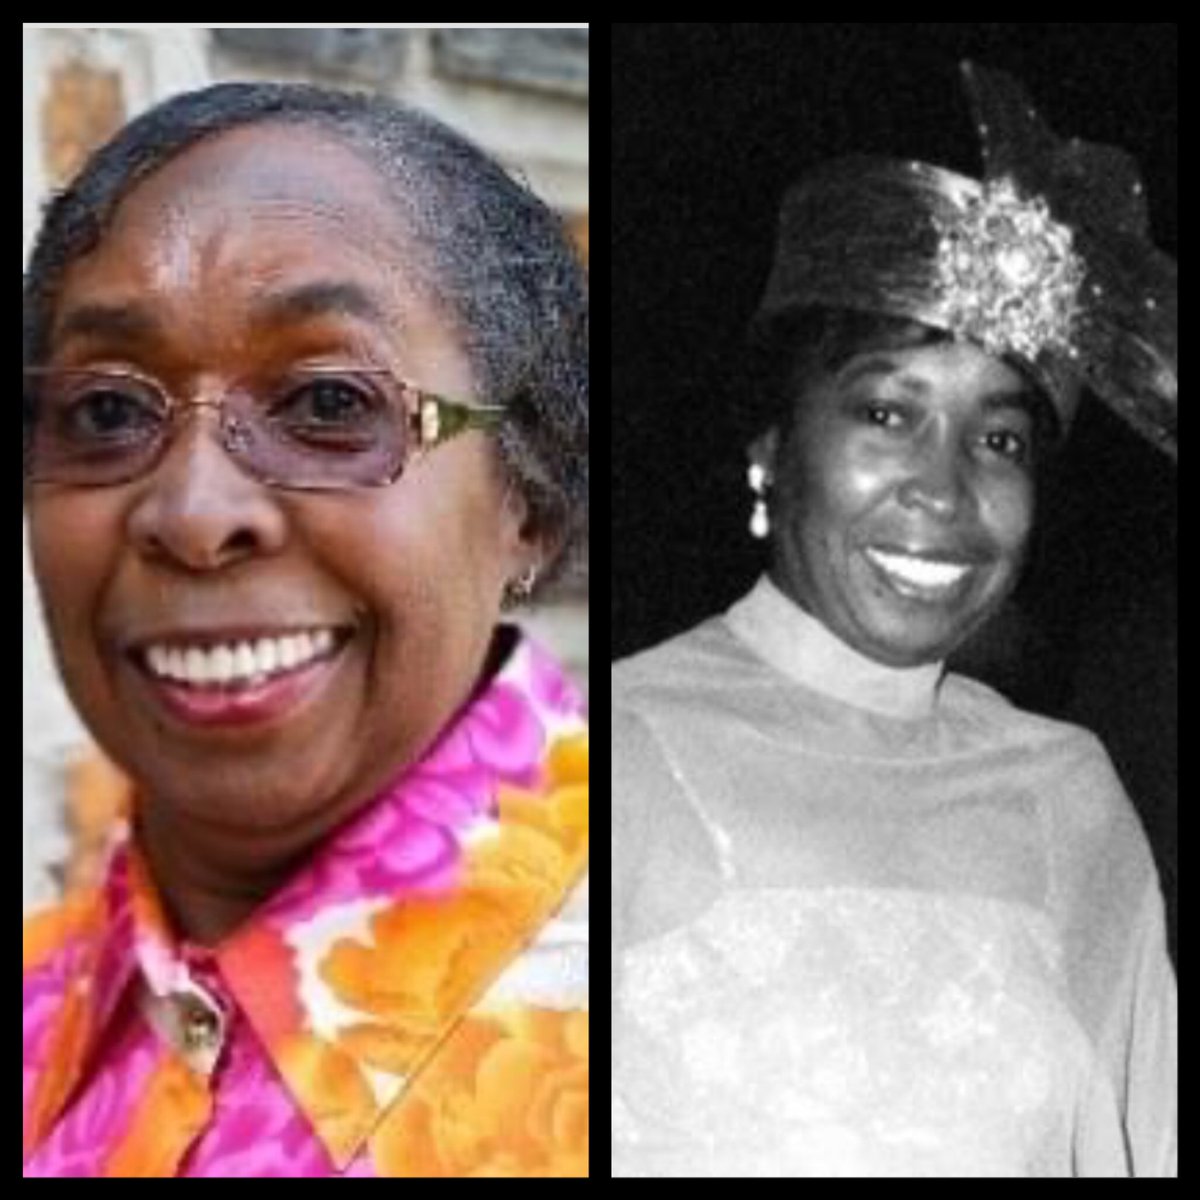 Dr. Sayde Curry is the first African American woman in the United States to become a gastroenterologist. She was also the first post graduate trainee at Duke University in 1969. Dr Curry is a graduate of  @JCSUniversity and Howard University Medical School. #BlackHistoryMonth  